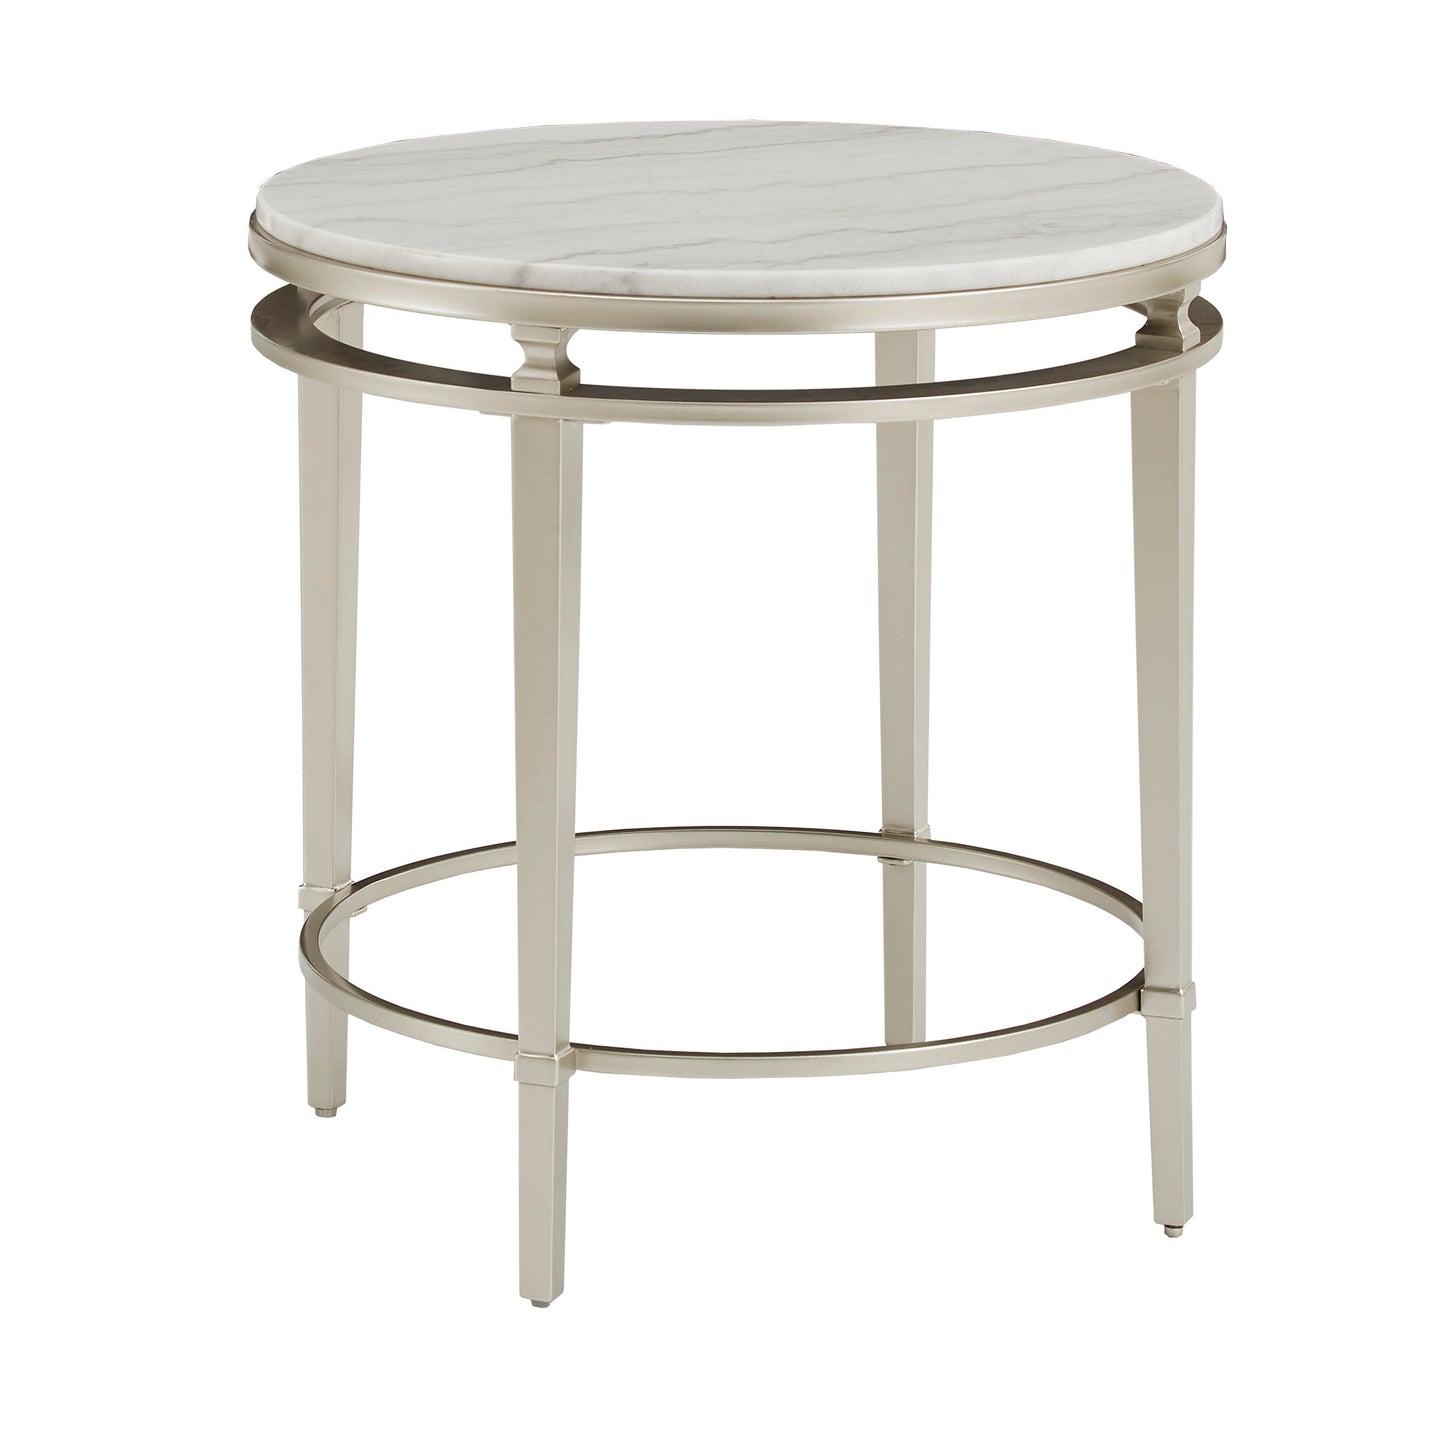 Champagne Silver Finish Round Marble Top End Table